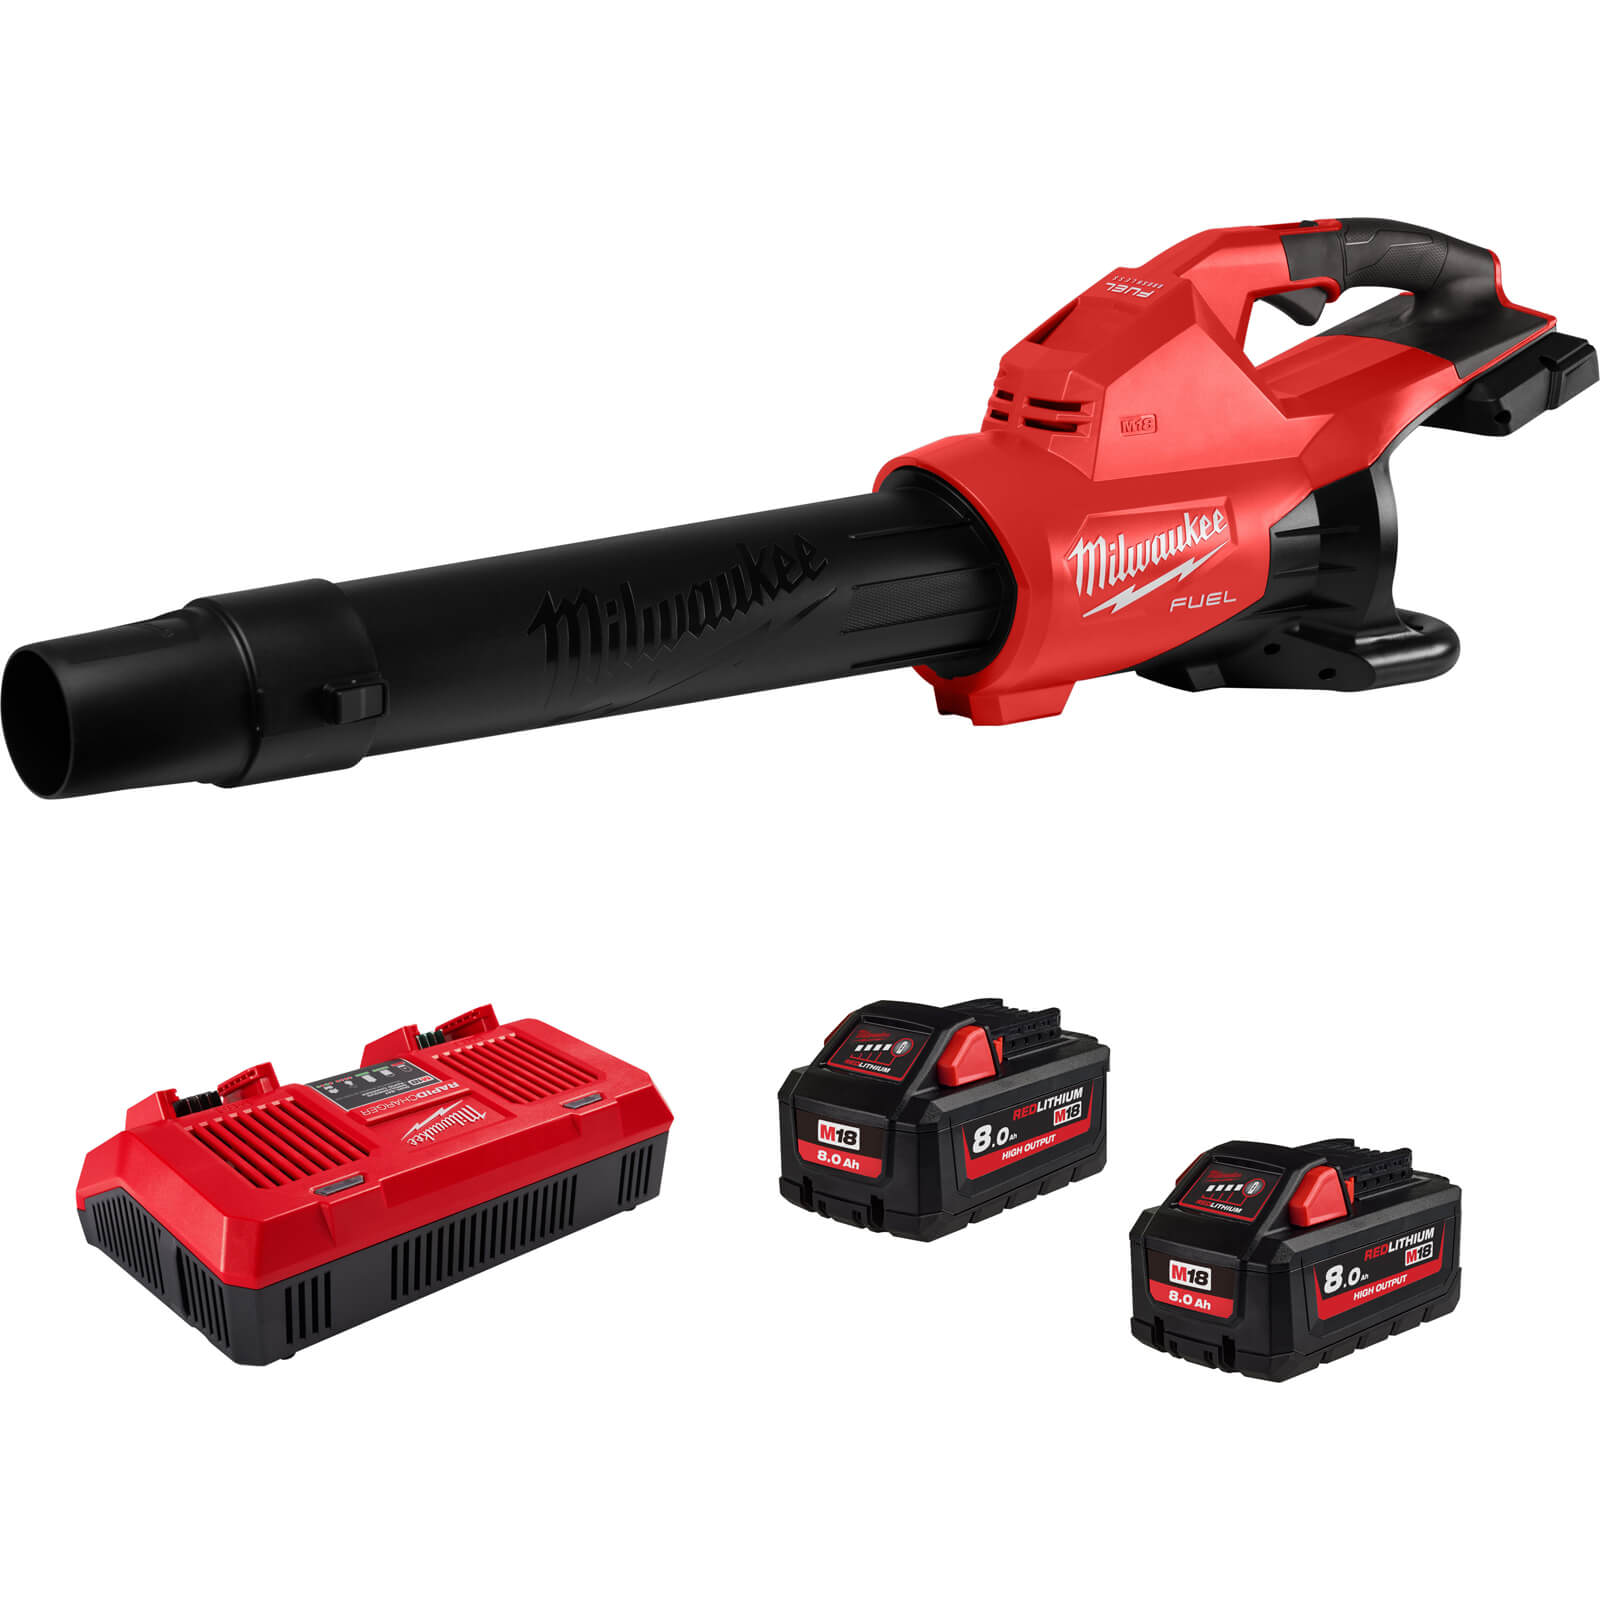 Image of Milwaukee M18 F2BL Fuel Twin 18v Cordless Brushless Garden Leaf Blower 2 x 8ah Li-ion Charger